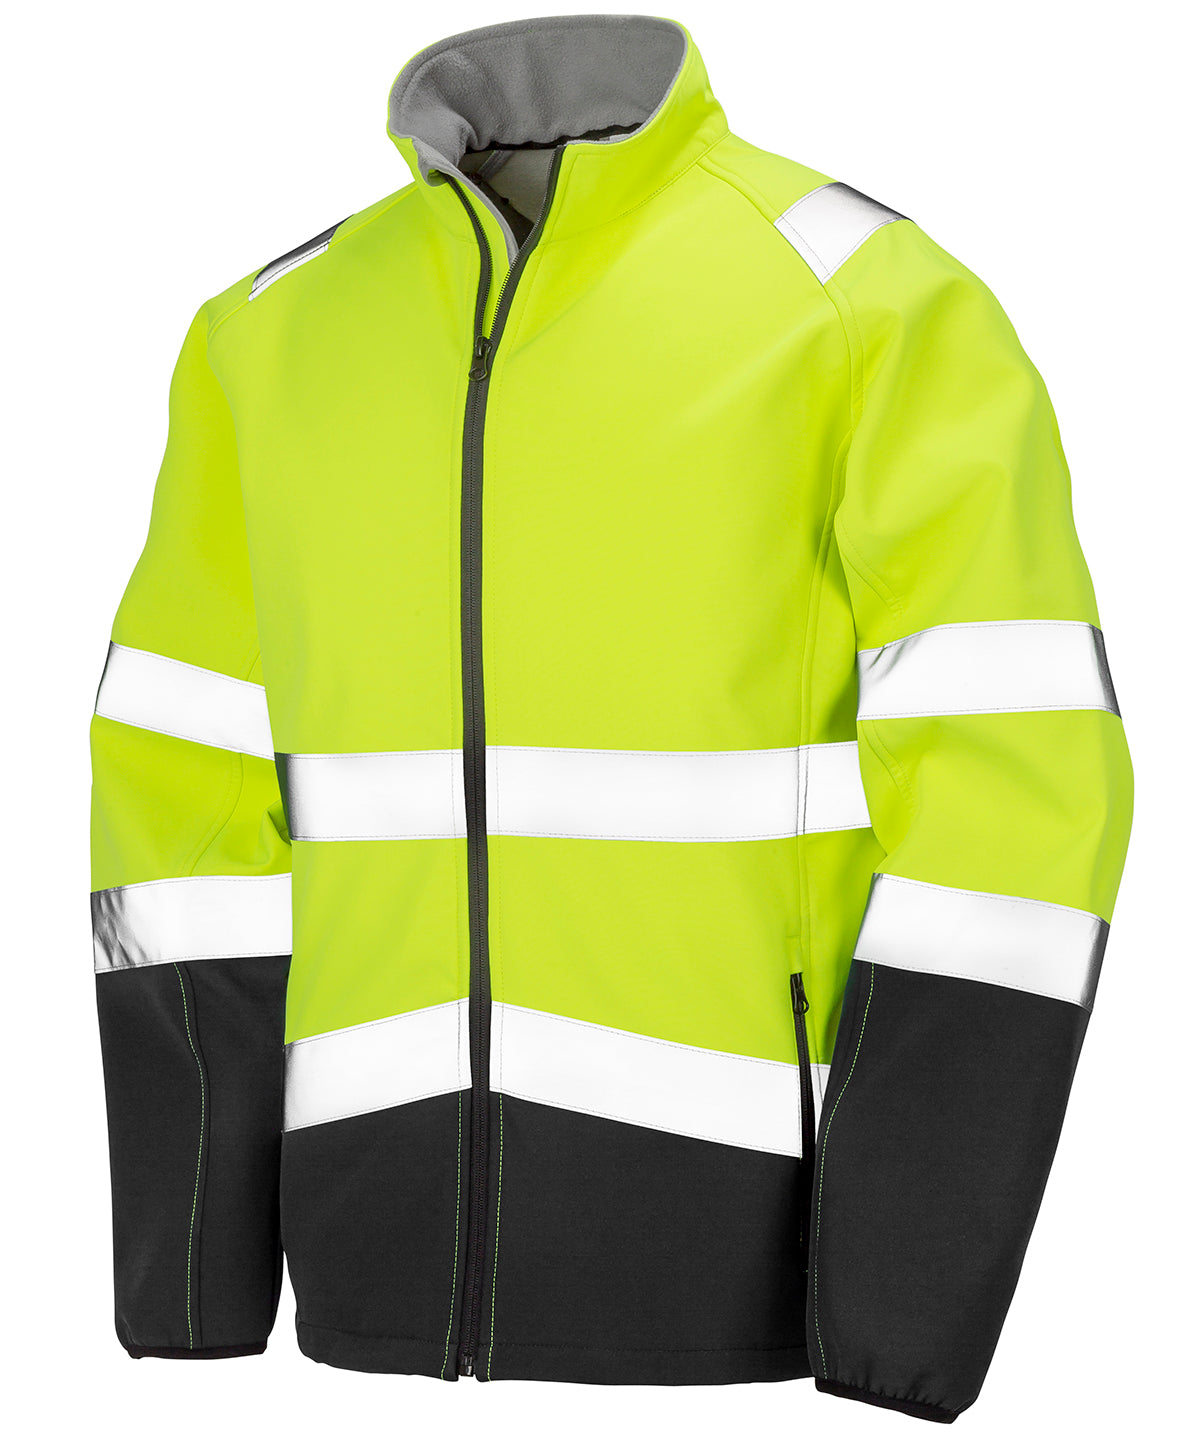 His Vis Softshell Safety Jacket